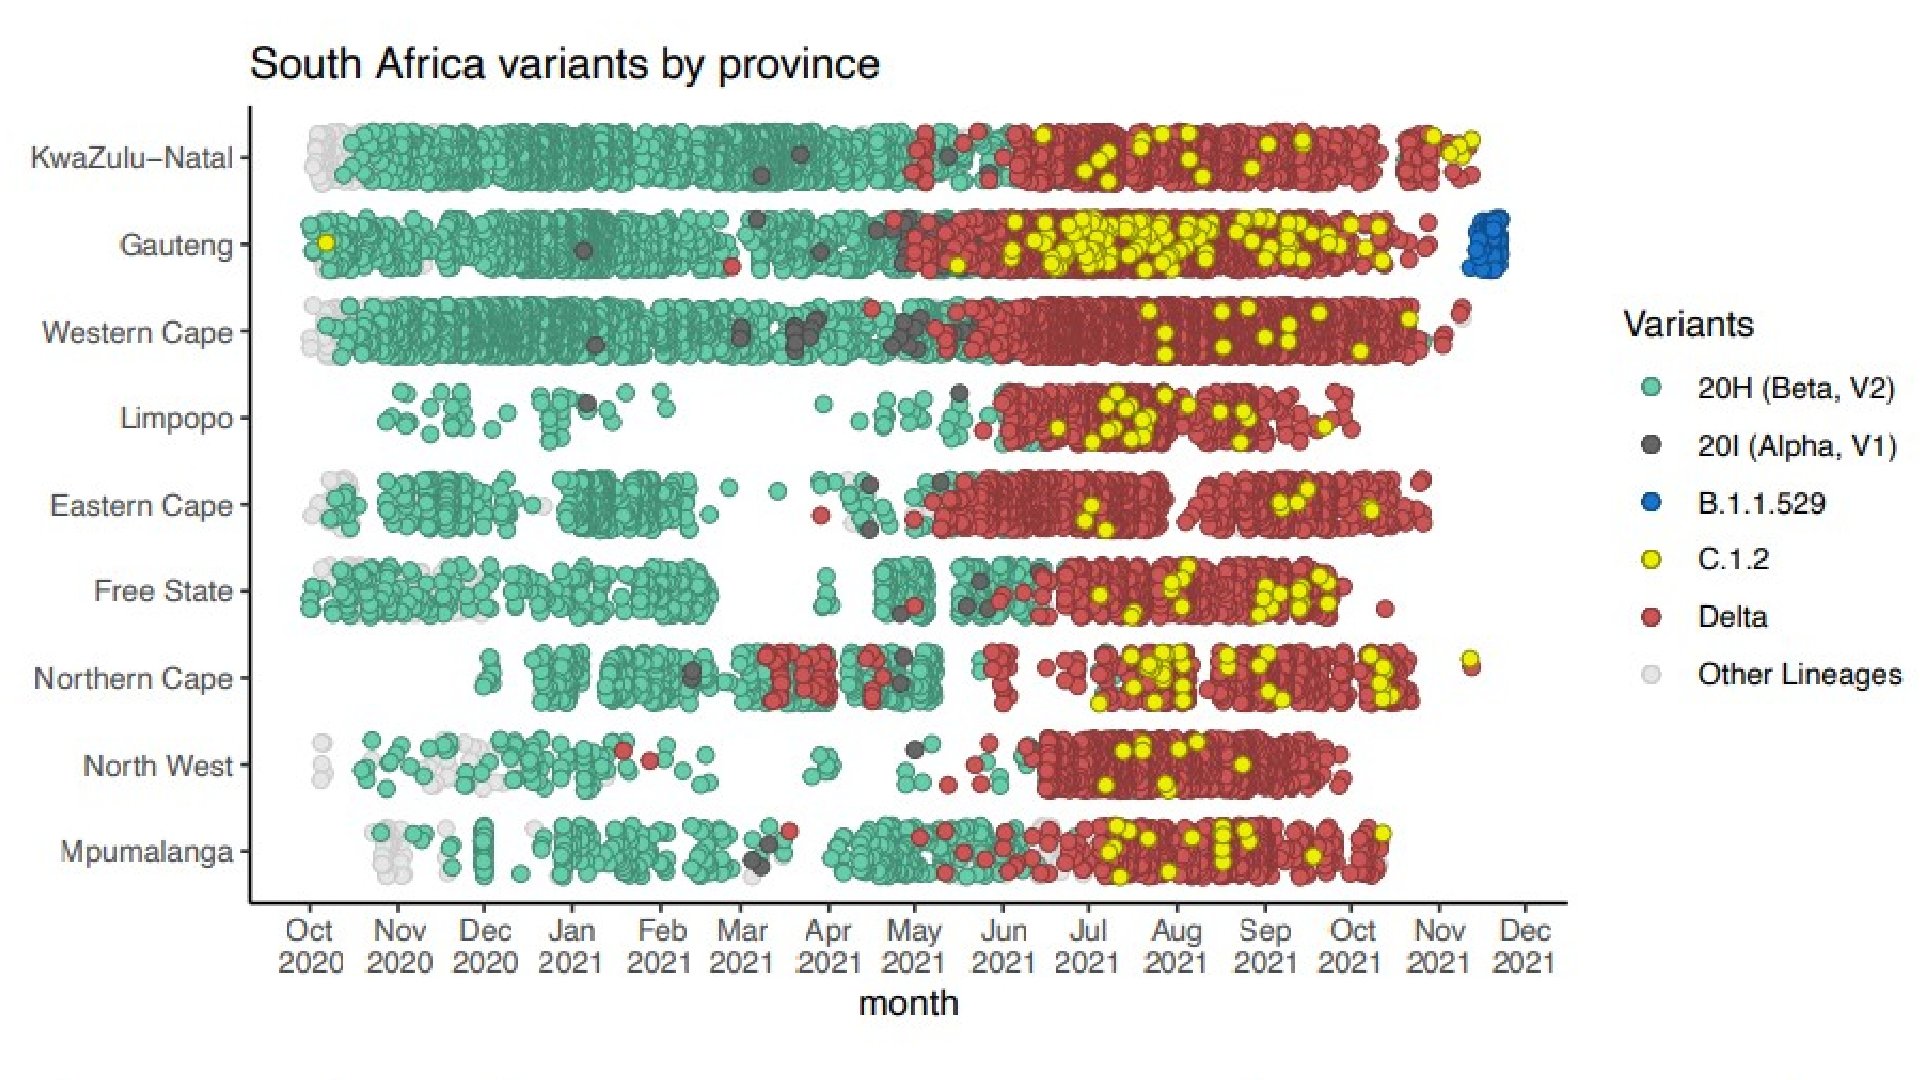 South Africa variants by province NGS-SA 1.jpg